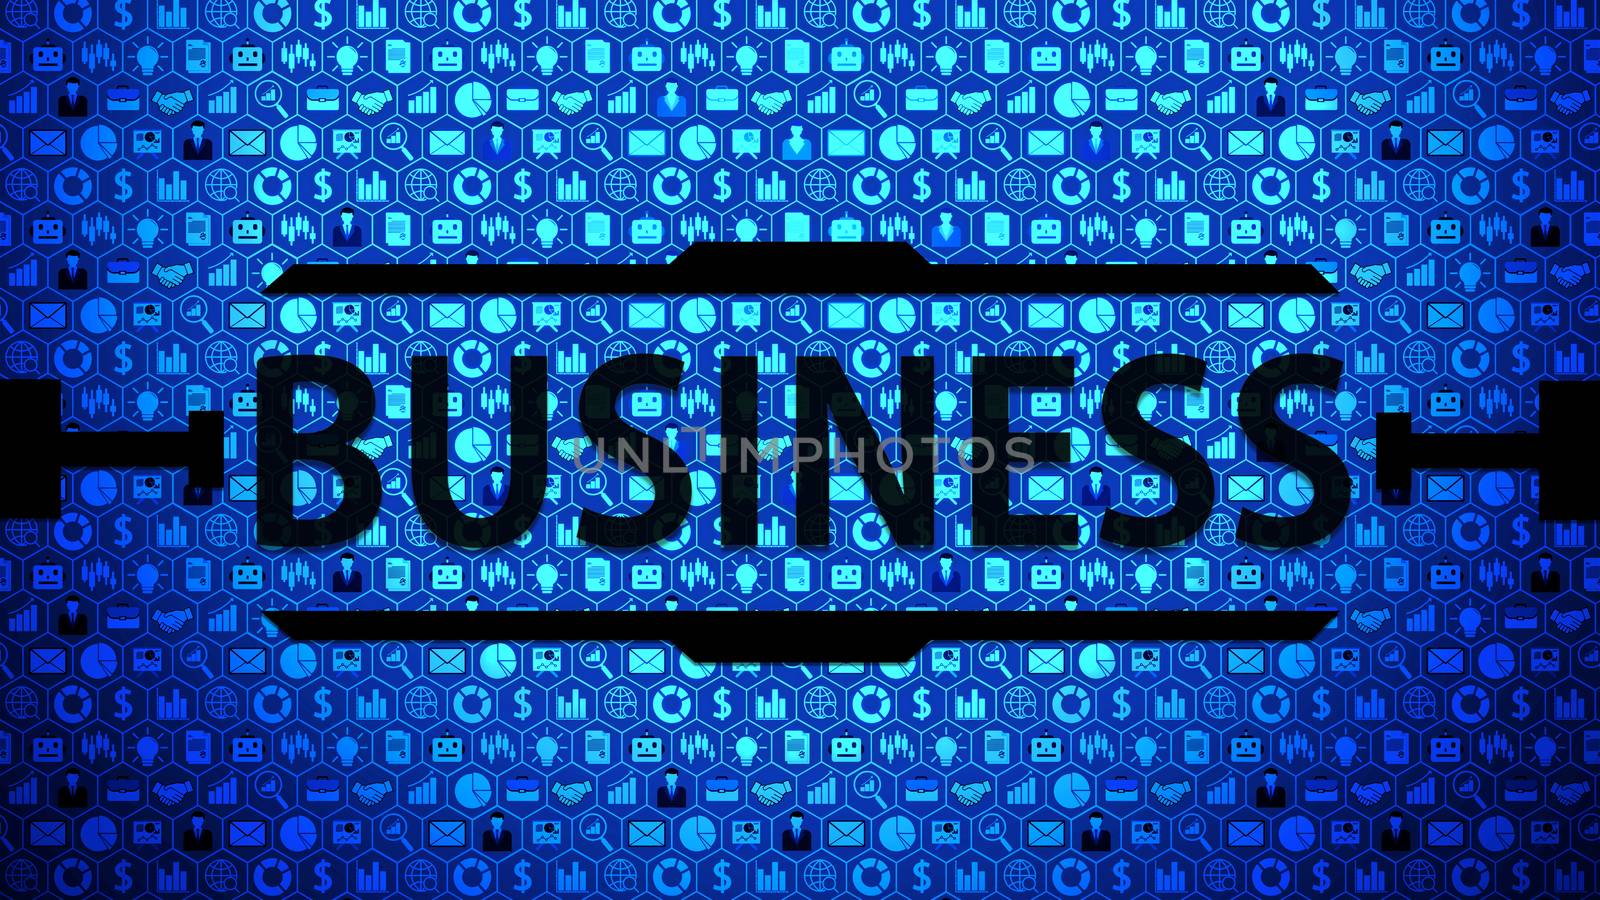 8K Business and Technology Big Picture Background Composed of Icons Set with Blue Light ver.1 by ariya23156